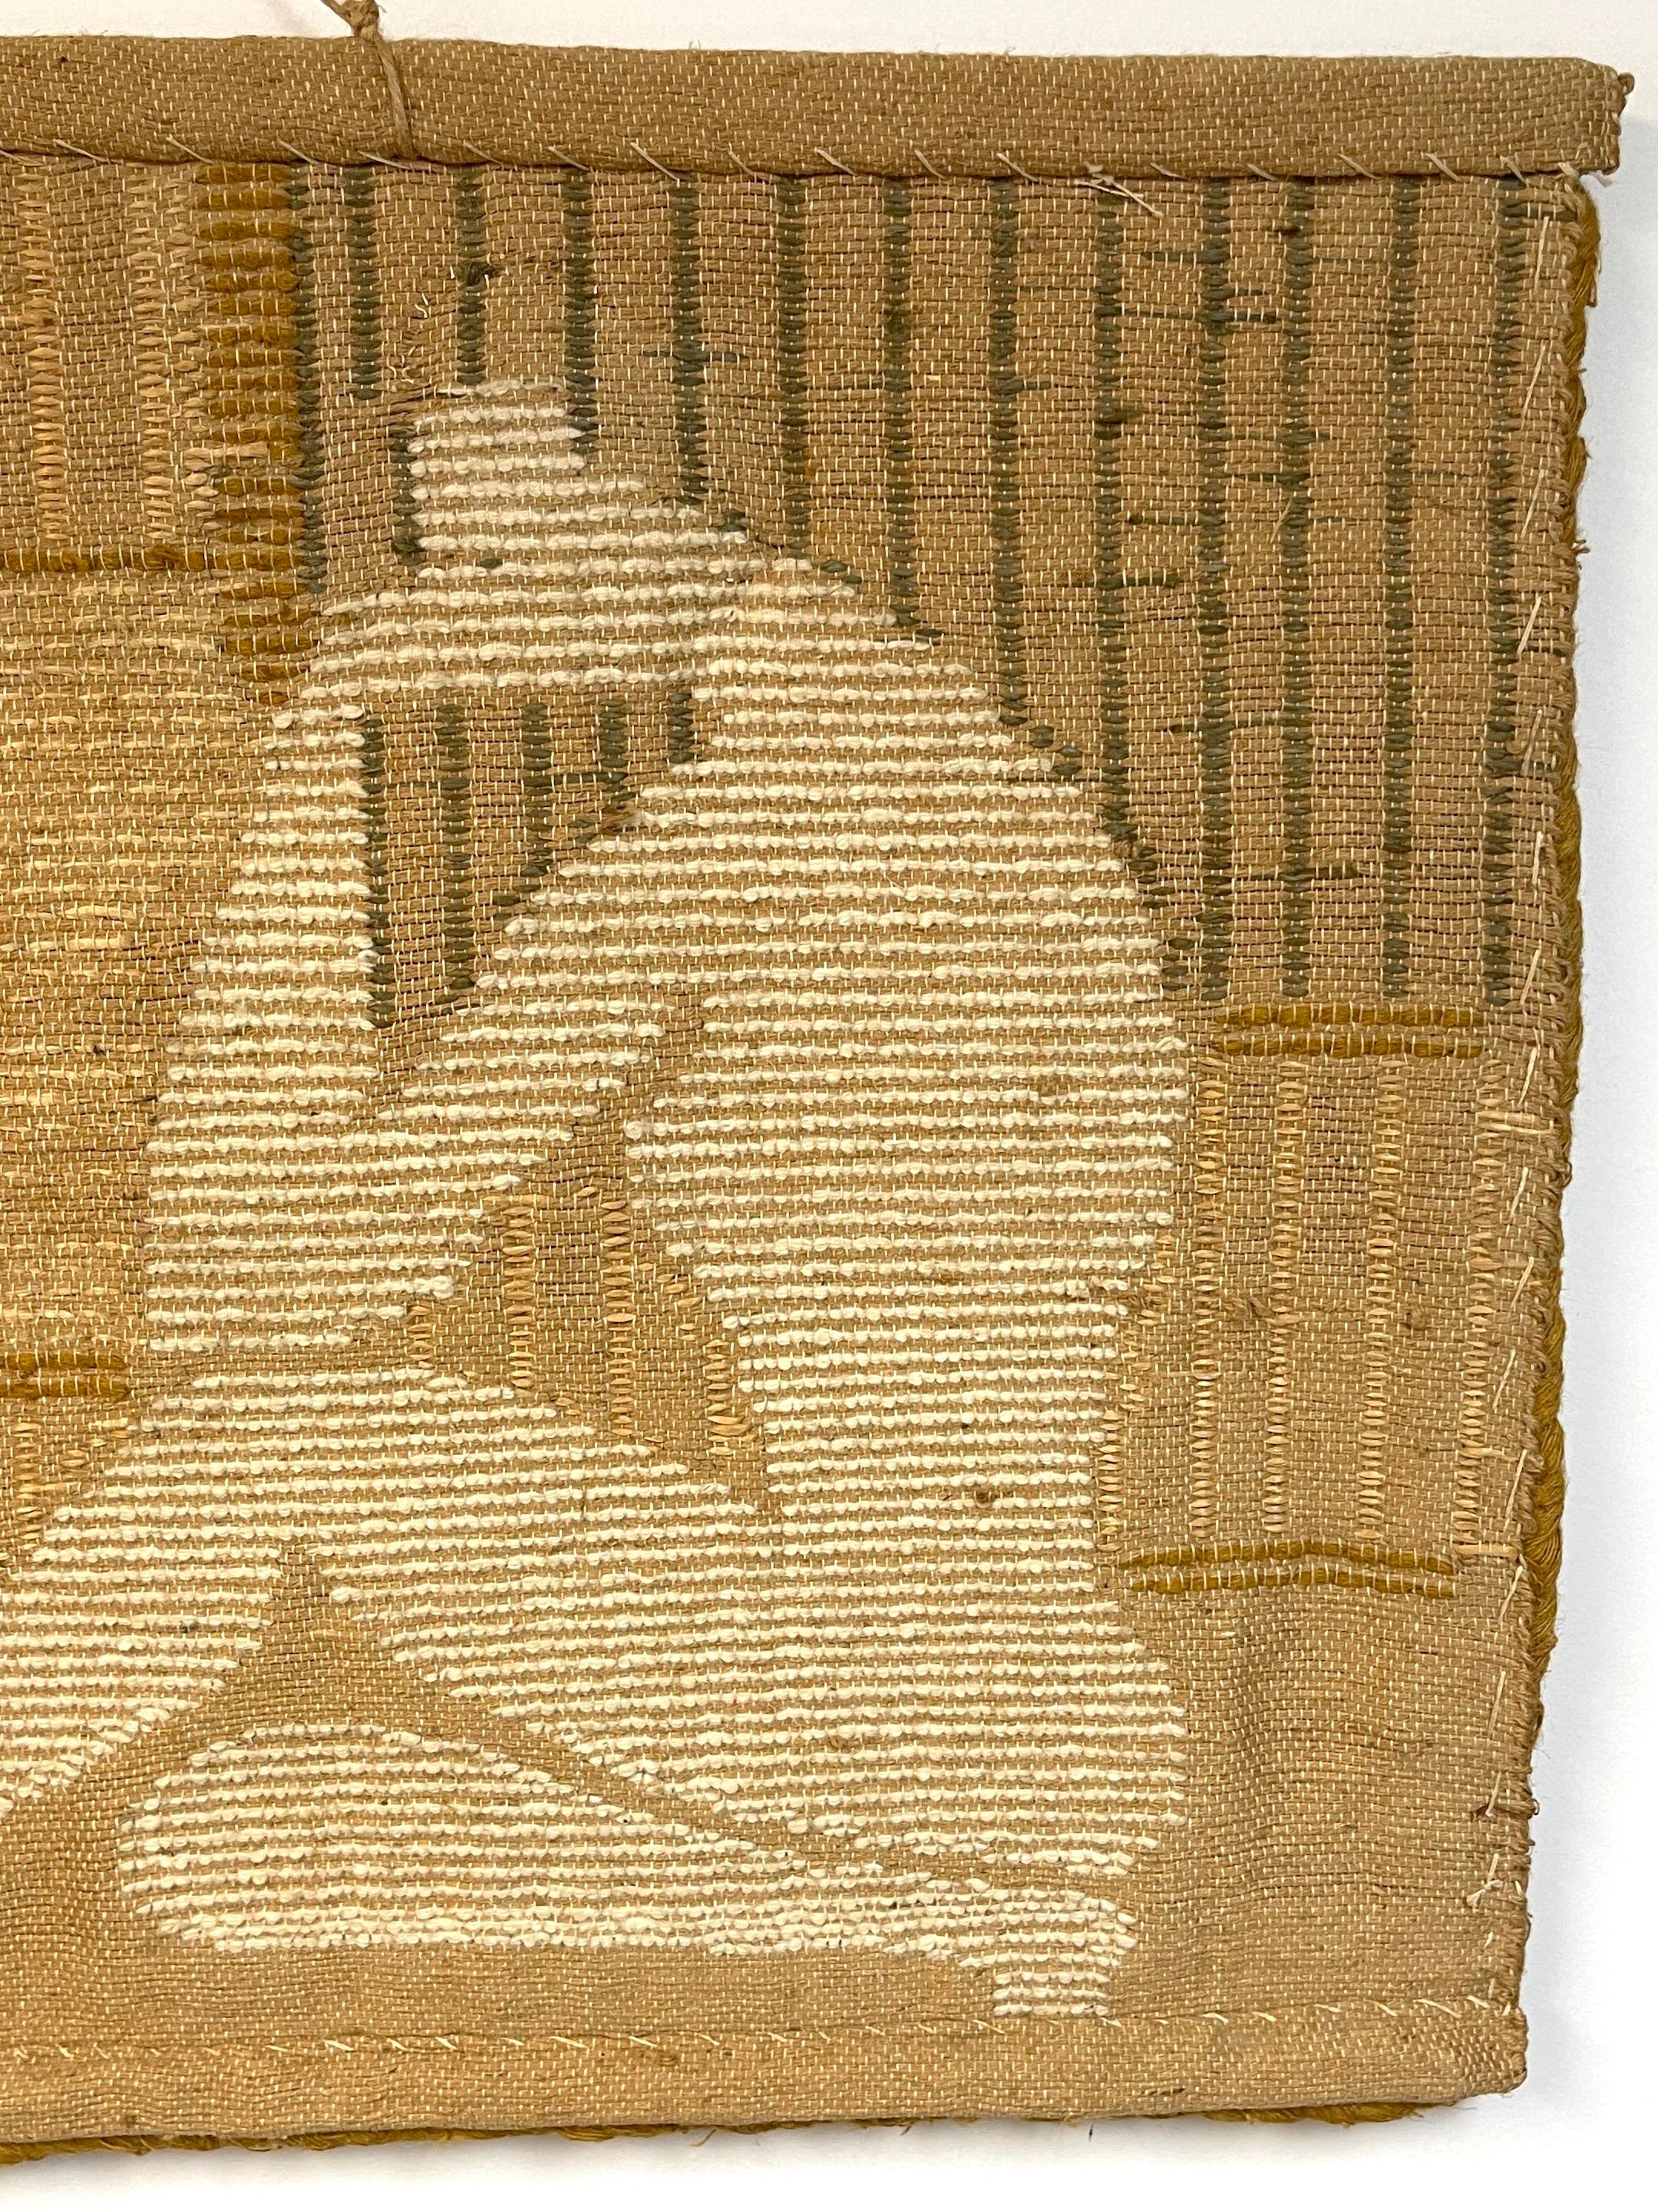 Natural Fiber Art Wall Tapestry 'Seated Nude' by Don Freedman, 1978 1